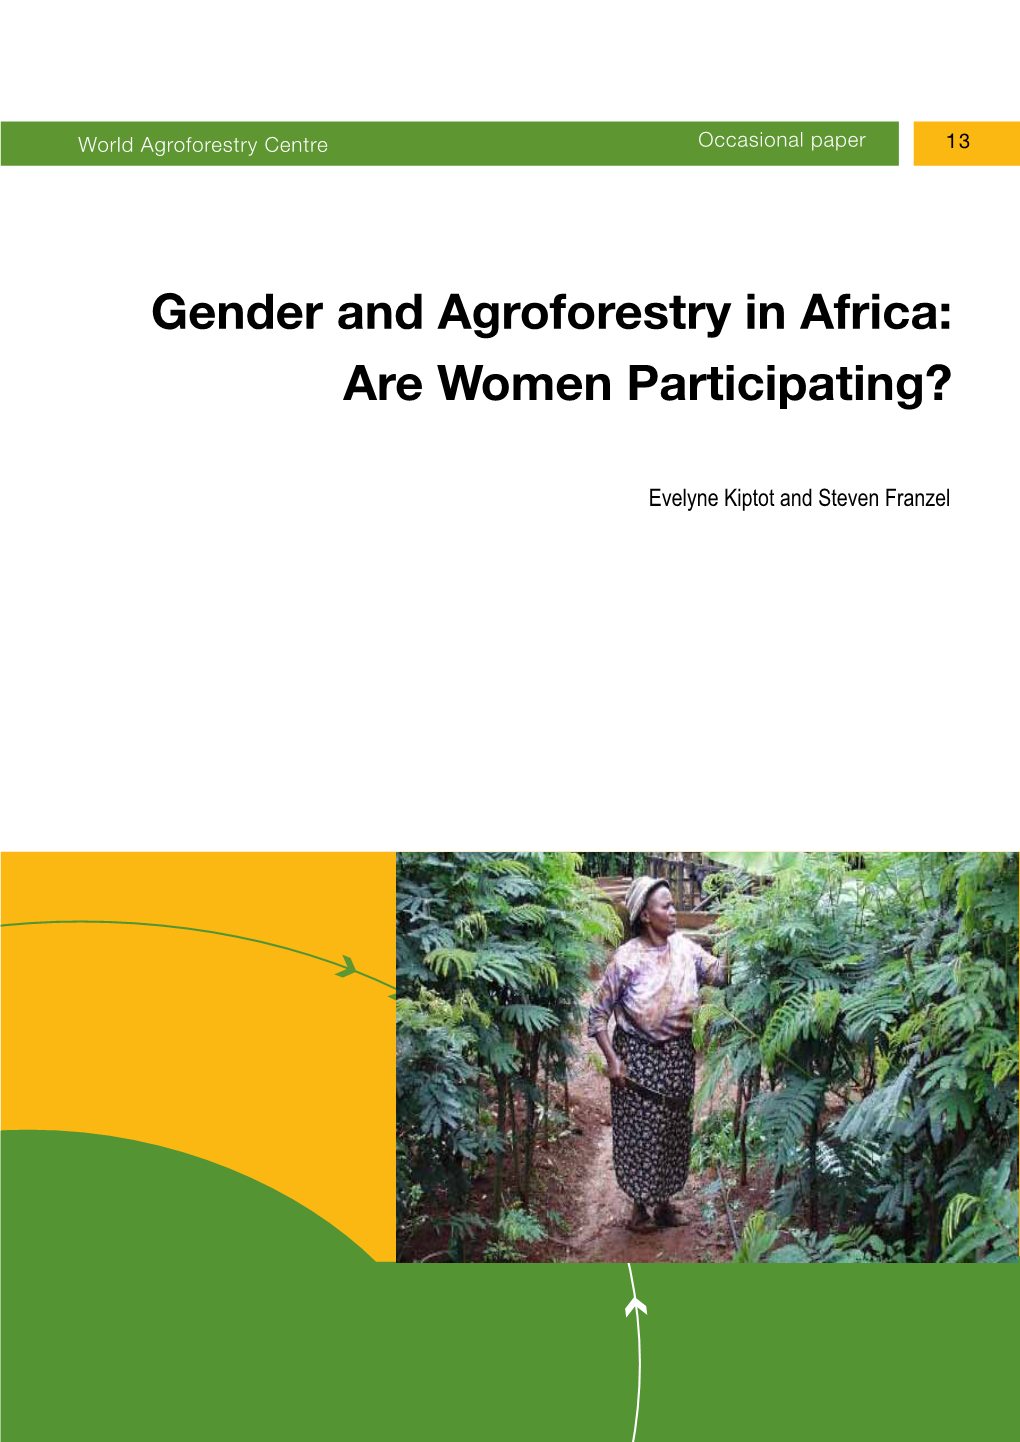 Gender and Agroforestry in Africa: Are Women Participating?